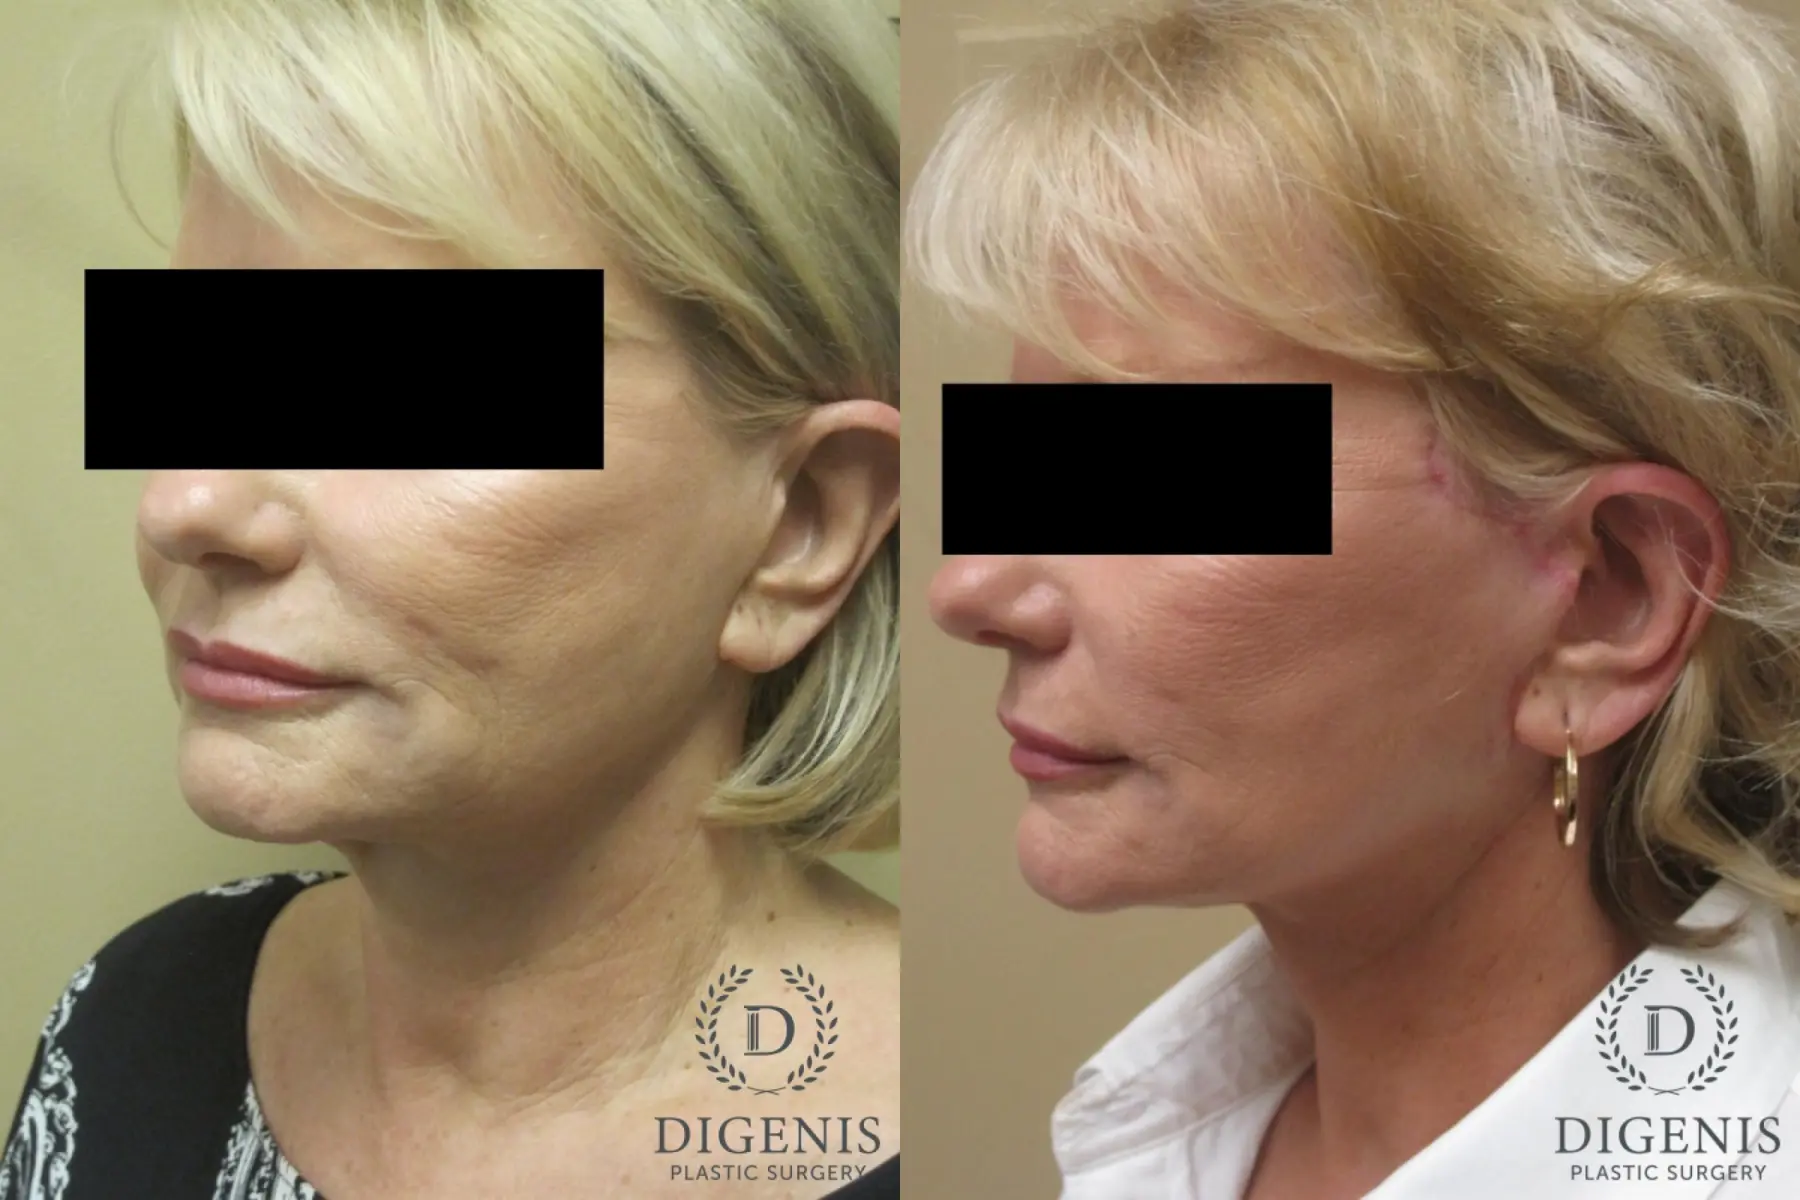 Facelift: Patient 15 - Before and After 4